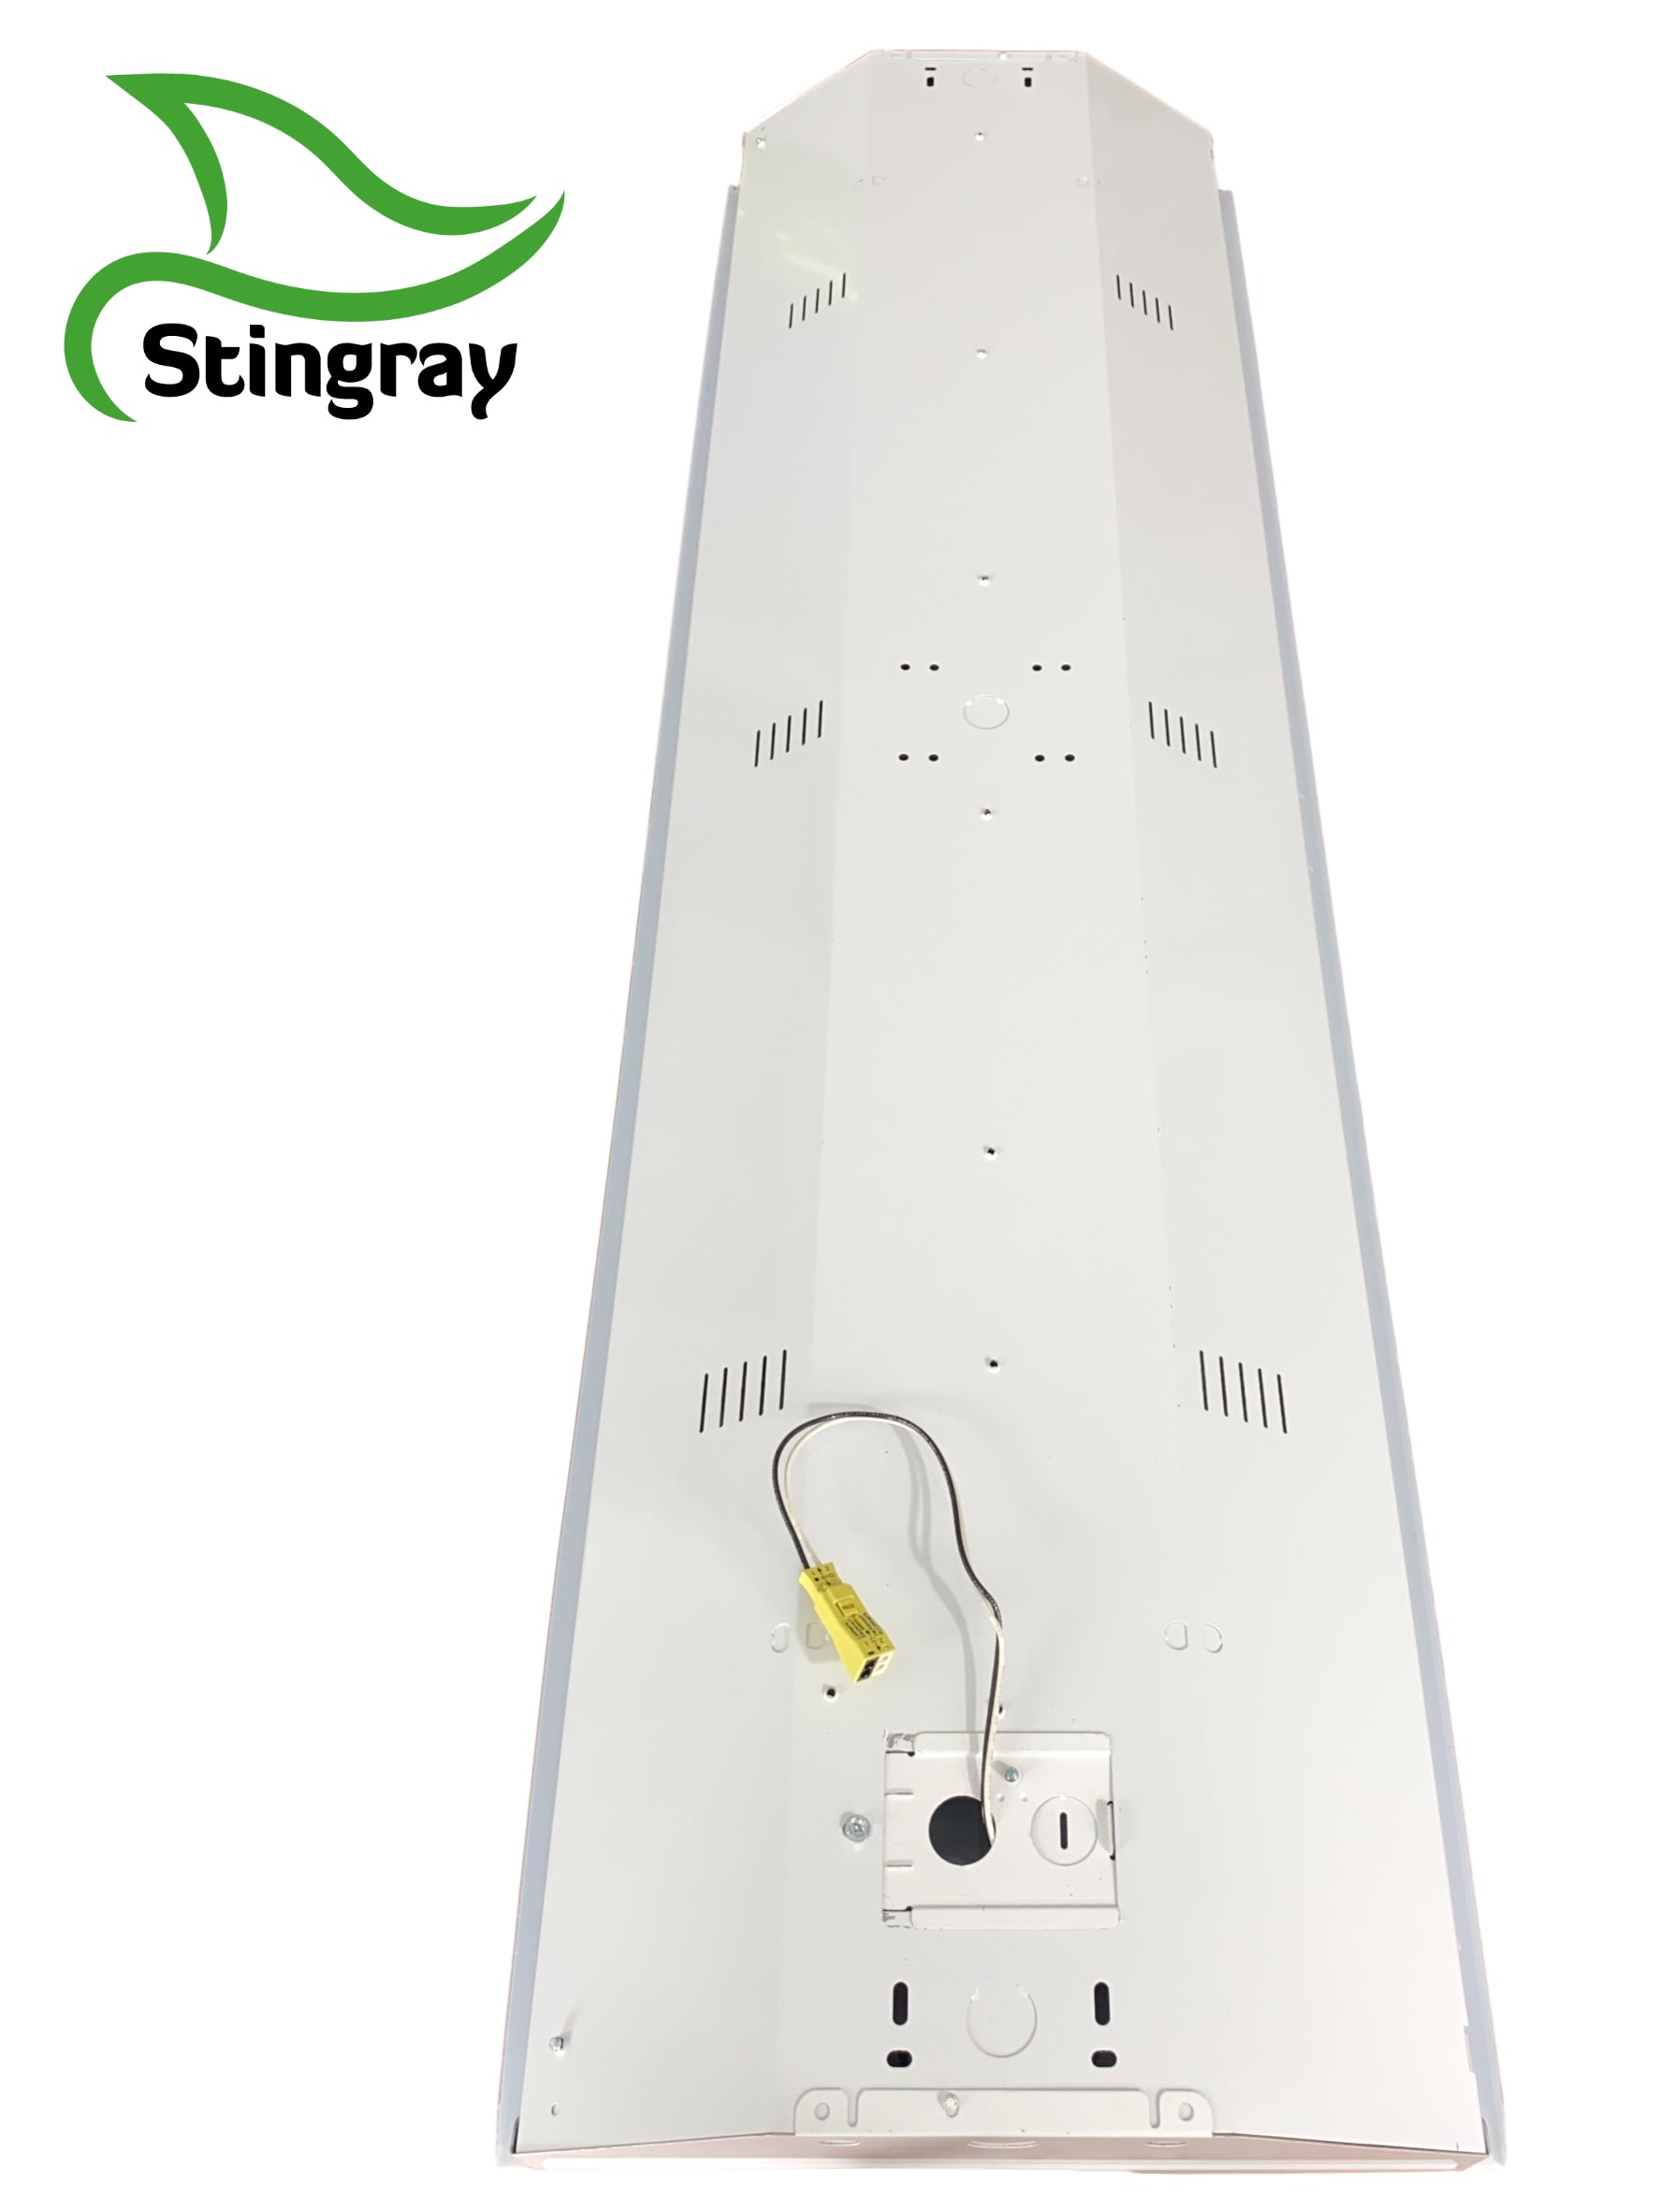 LED StingRay 4 XL MOTION ACTIVATED Shop Light (CLEAR LED)